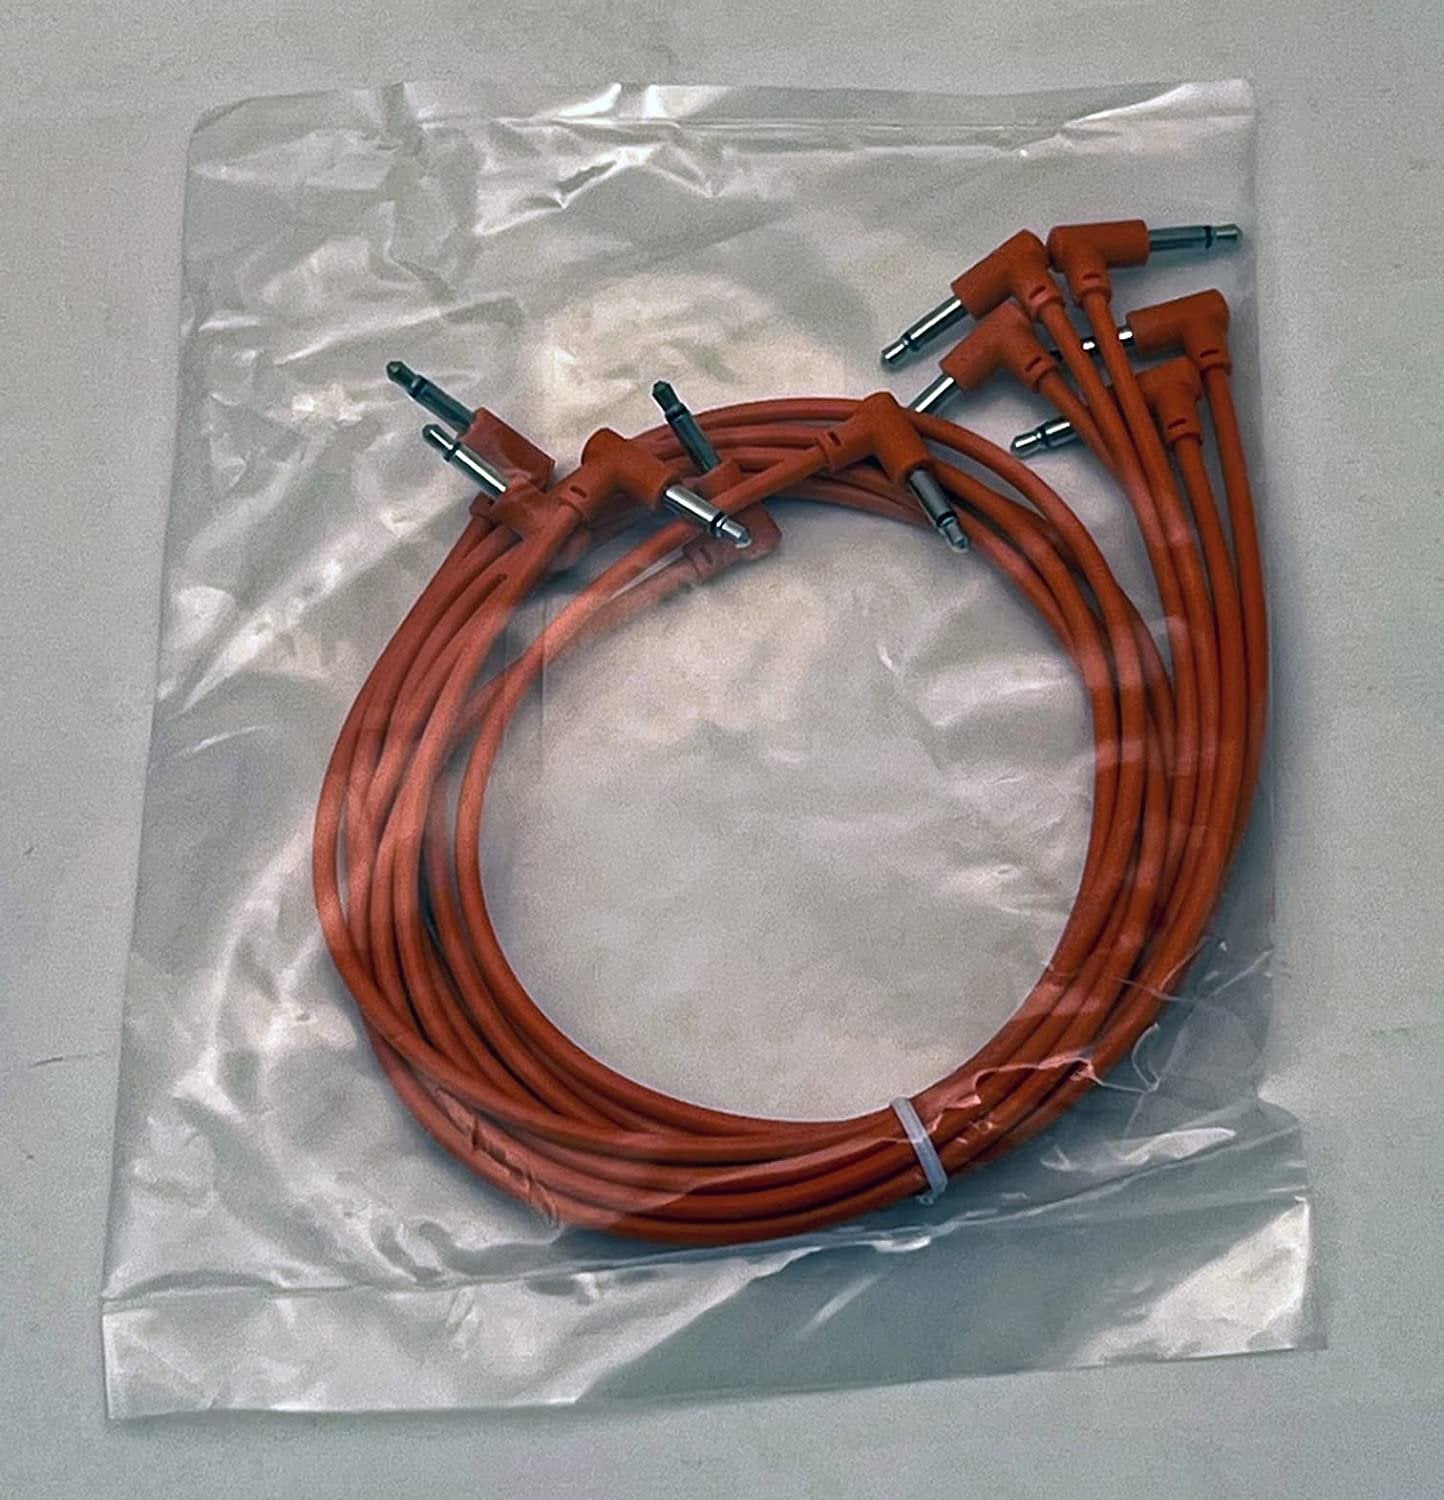 Luigis Modular M-PAR Right Angled Eurorack Patch Cables - Package of 5 Orange Cables, 24" (60 cm)